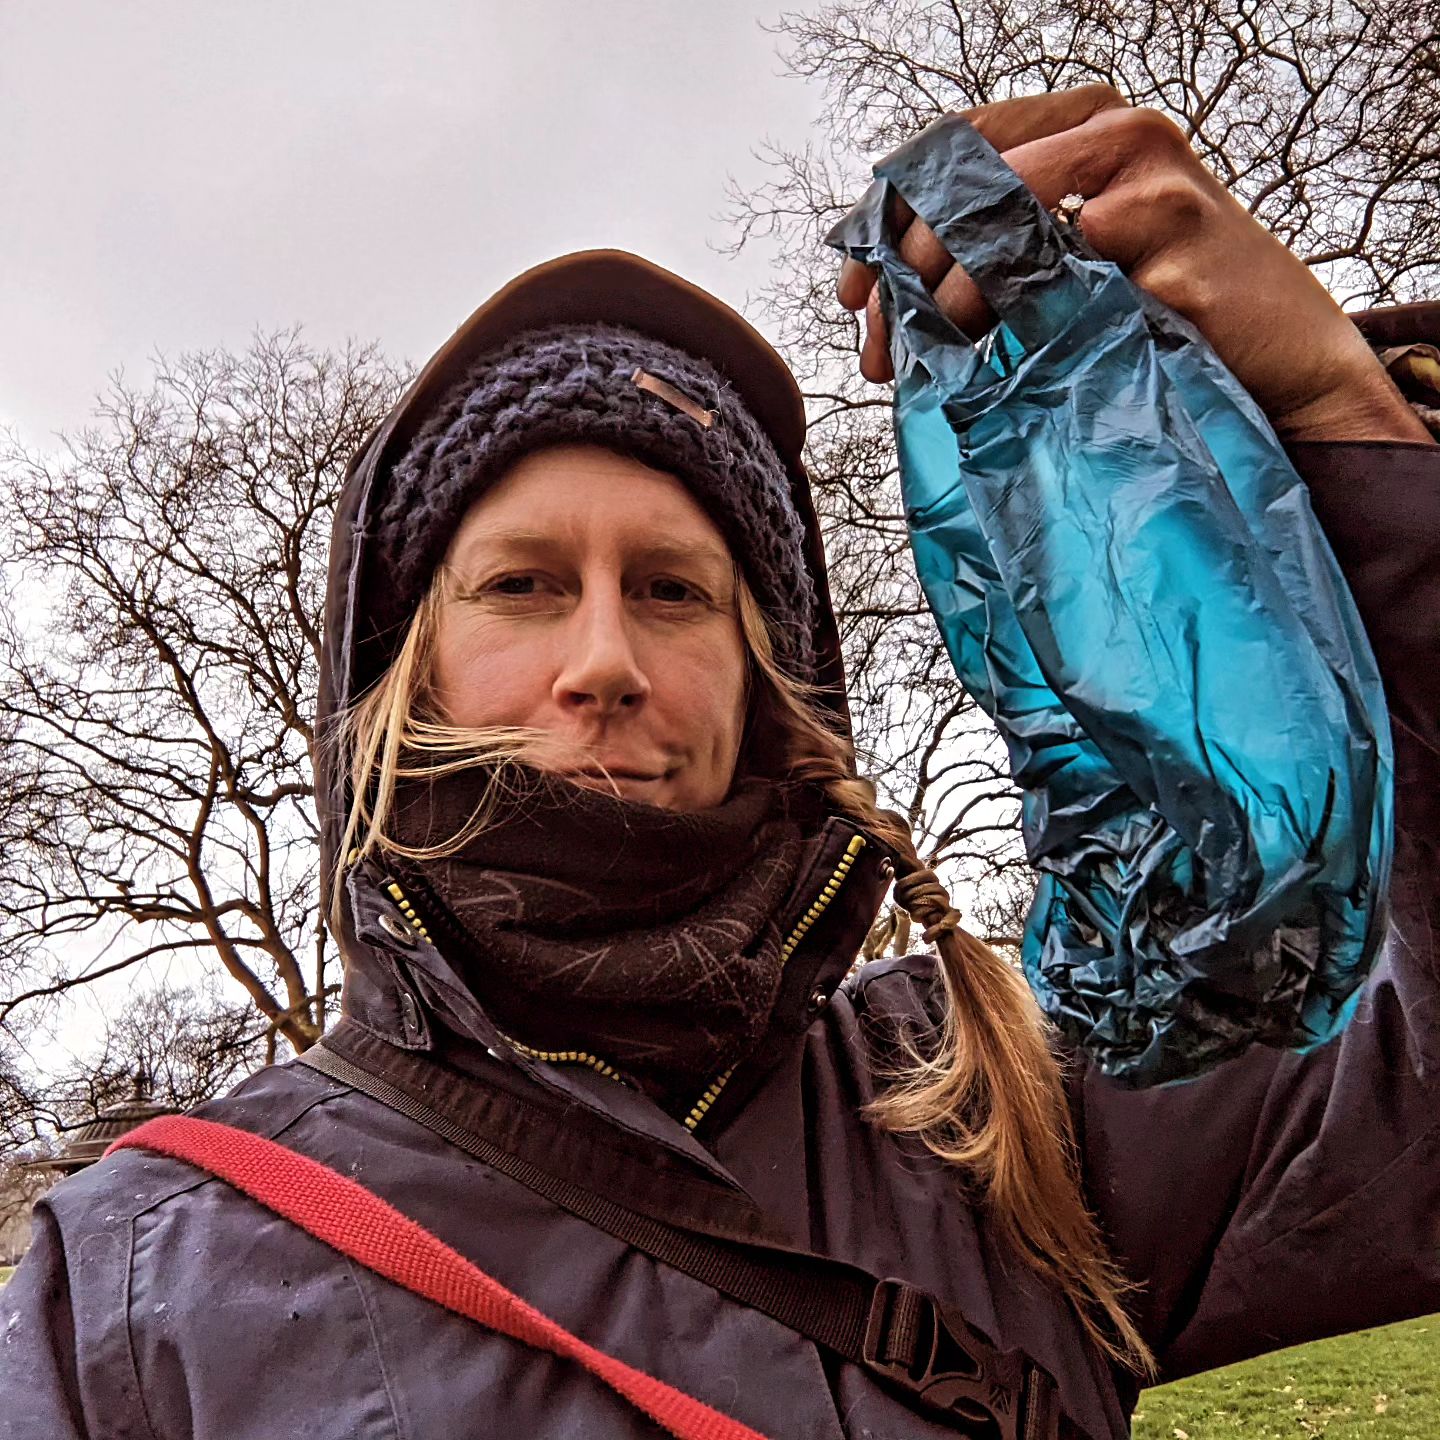 An image of a woman holding a reseacled poo bag